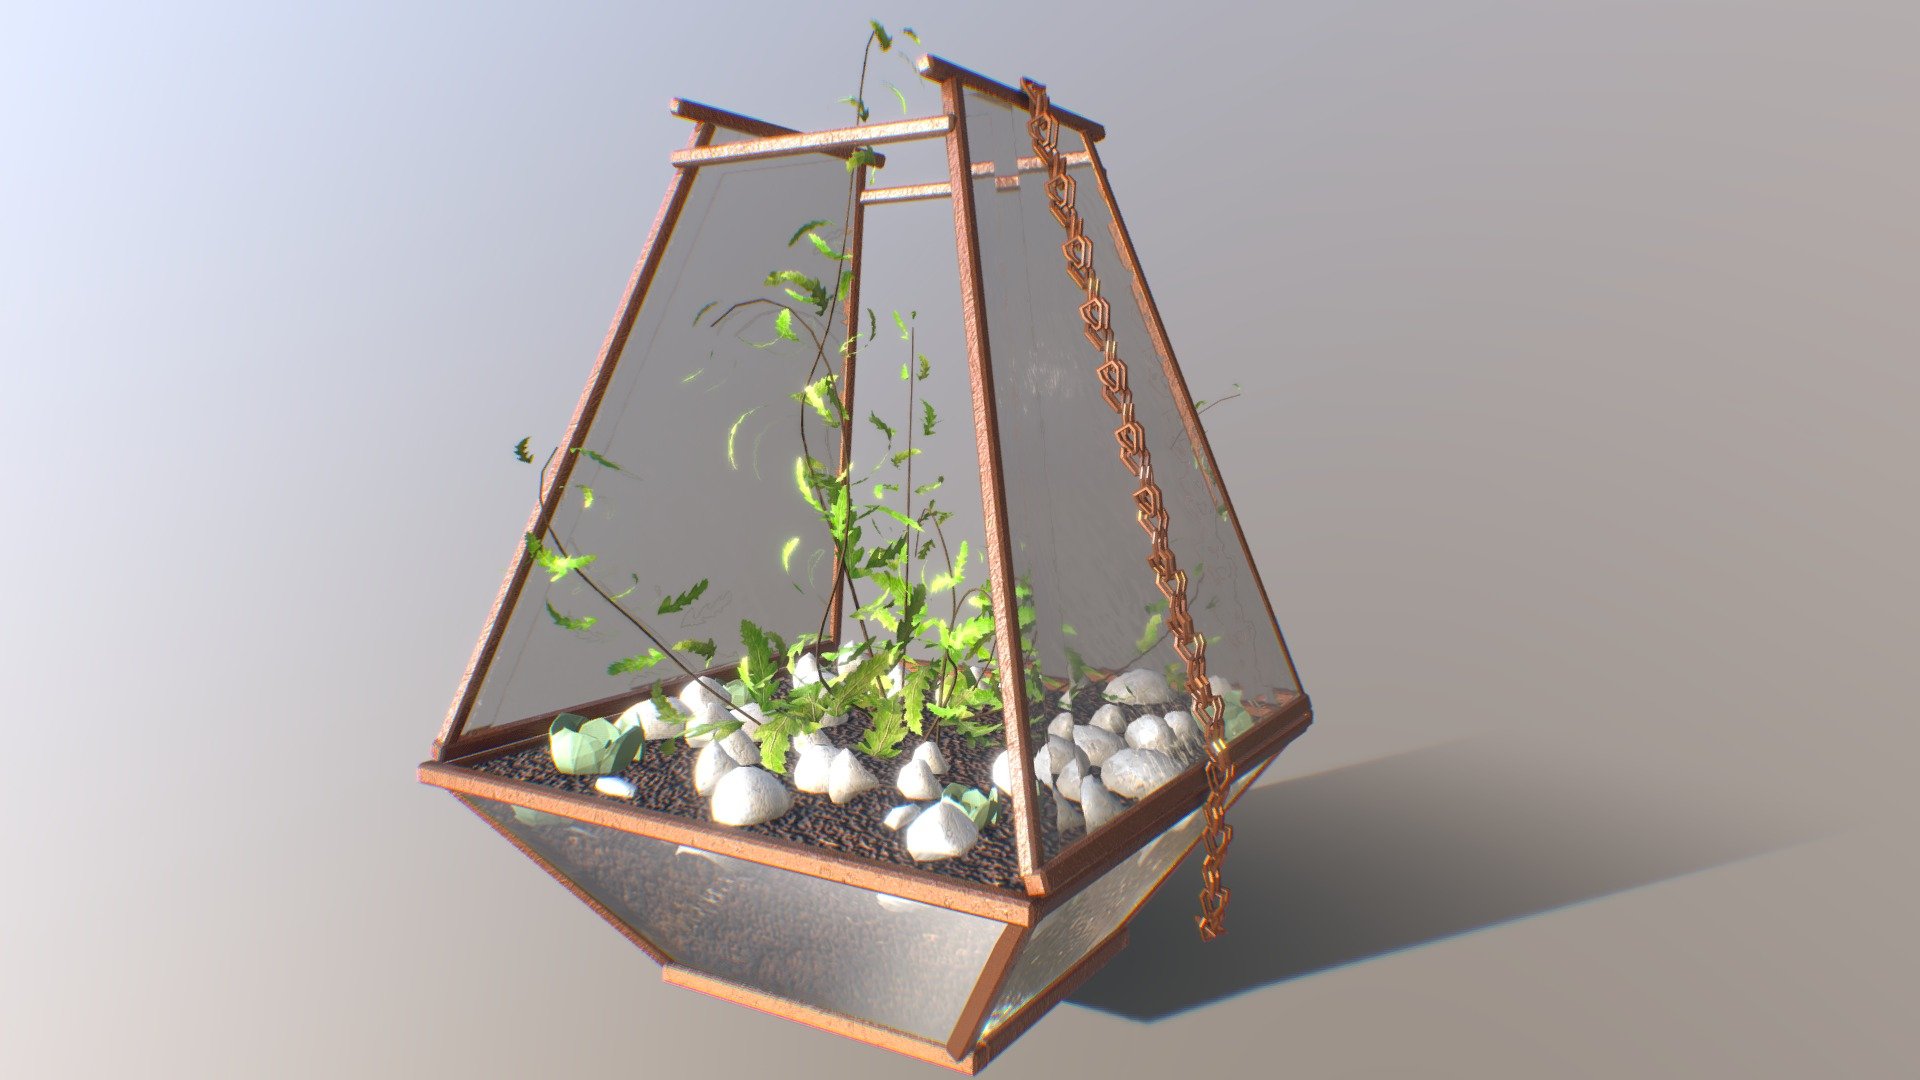 This week we had to create a potted plant. I've always liked the look of terrariums, so that's the kind of style I tried to go with 3d model